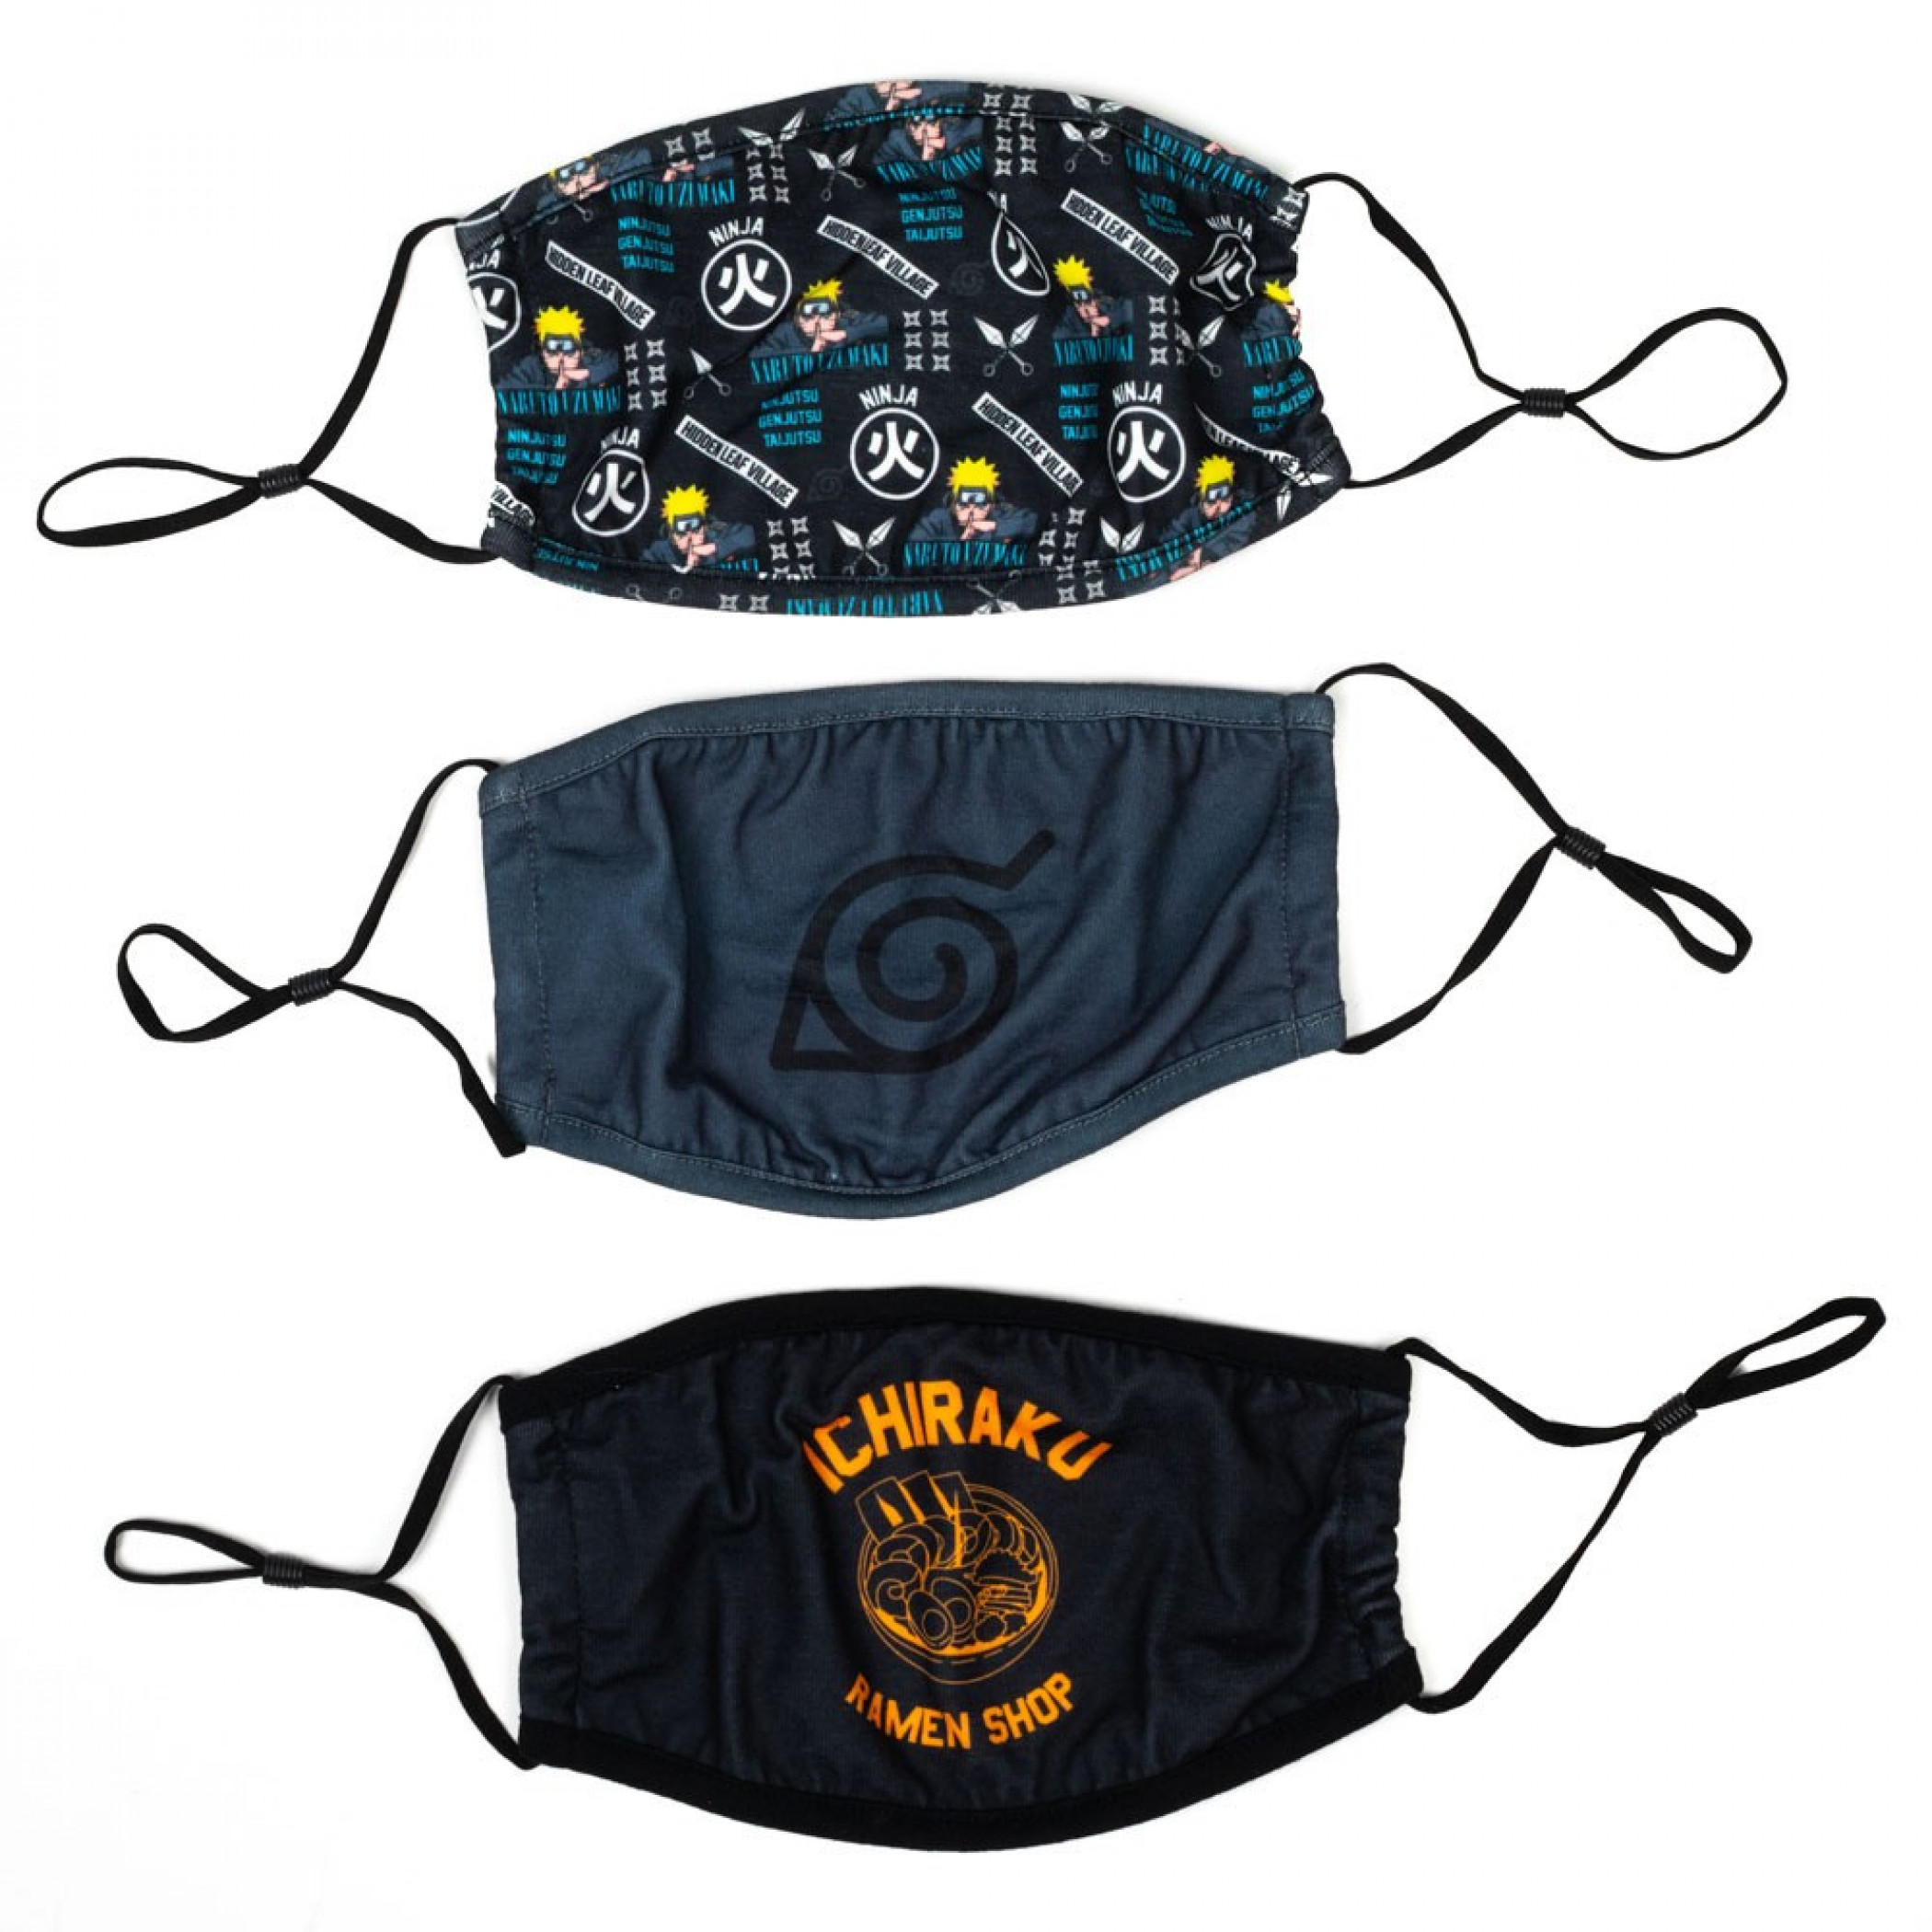 Naruto Characters and Symbols 3 Pack Adjustable Face Cover